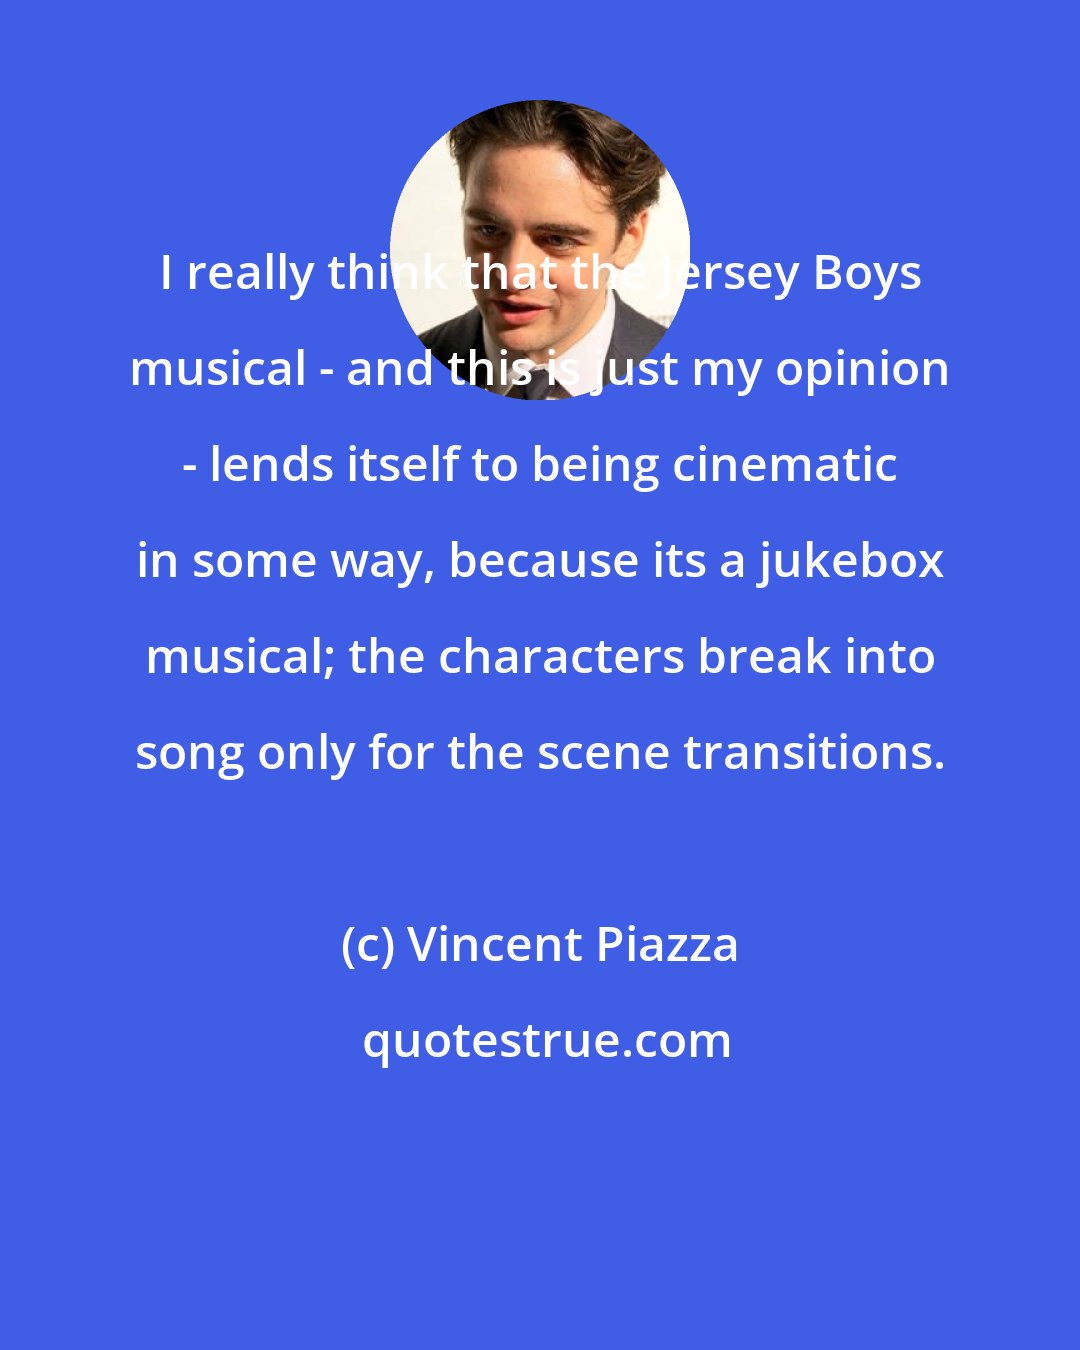 Vincent Piazza: I really think that the Jersey Boys musical - and this is just my opinion - lends itself to being cinematic in some way, because its a jukebox musical; the characters break into song only for the scene transitions.